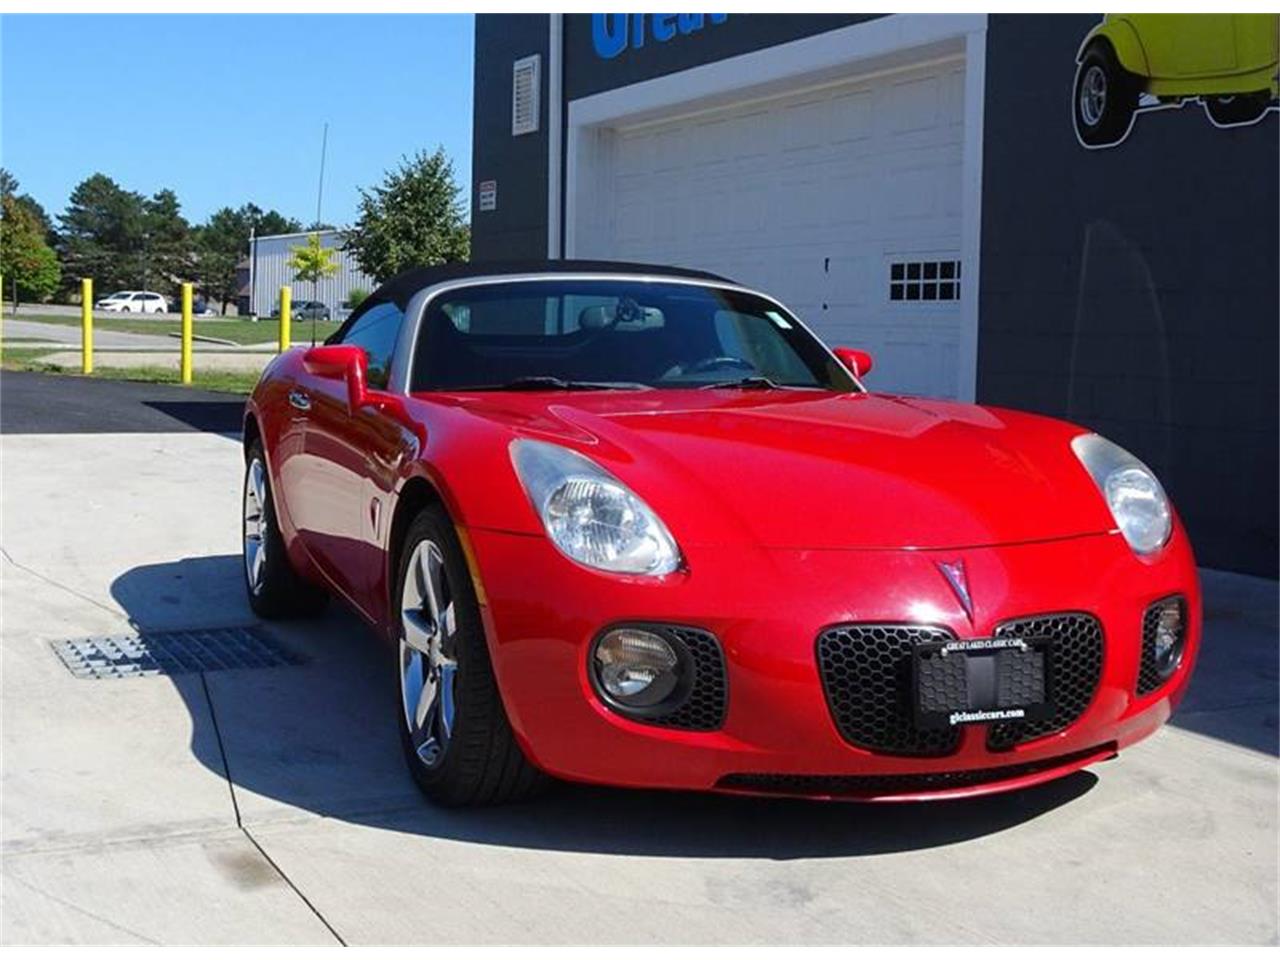 2008 Pontiac Solstice for sale in Hilton, NY – photo 77